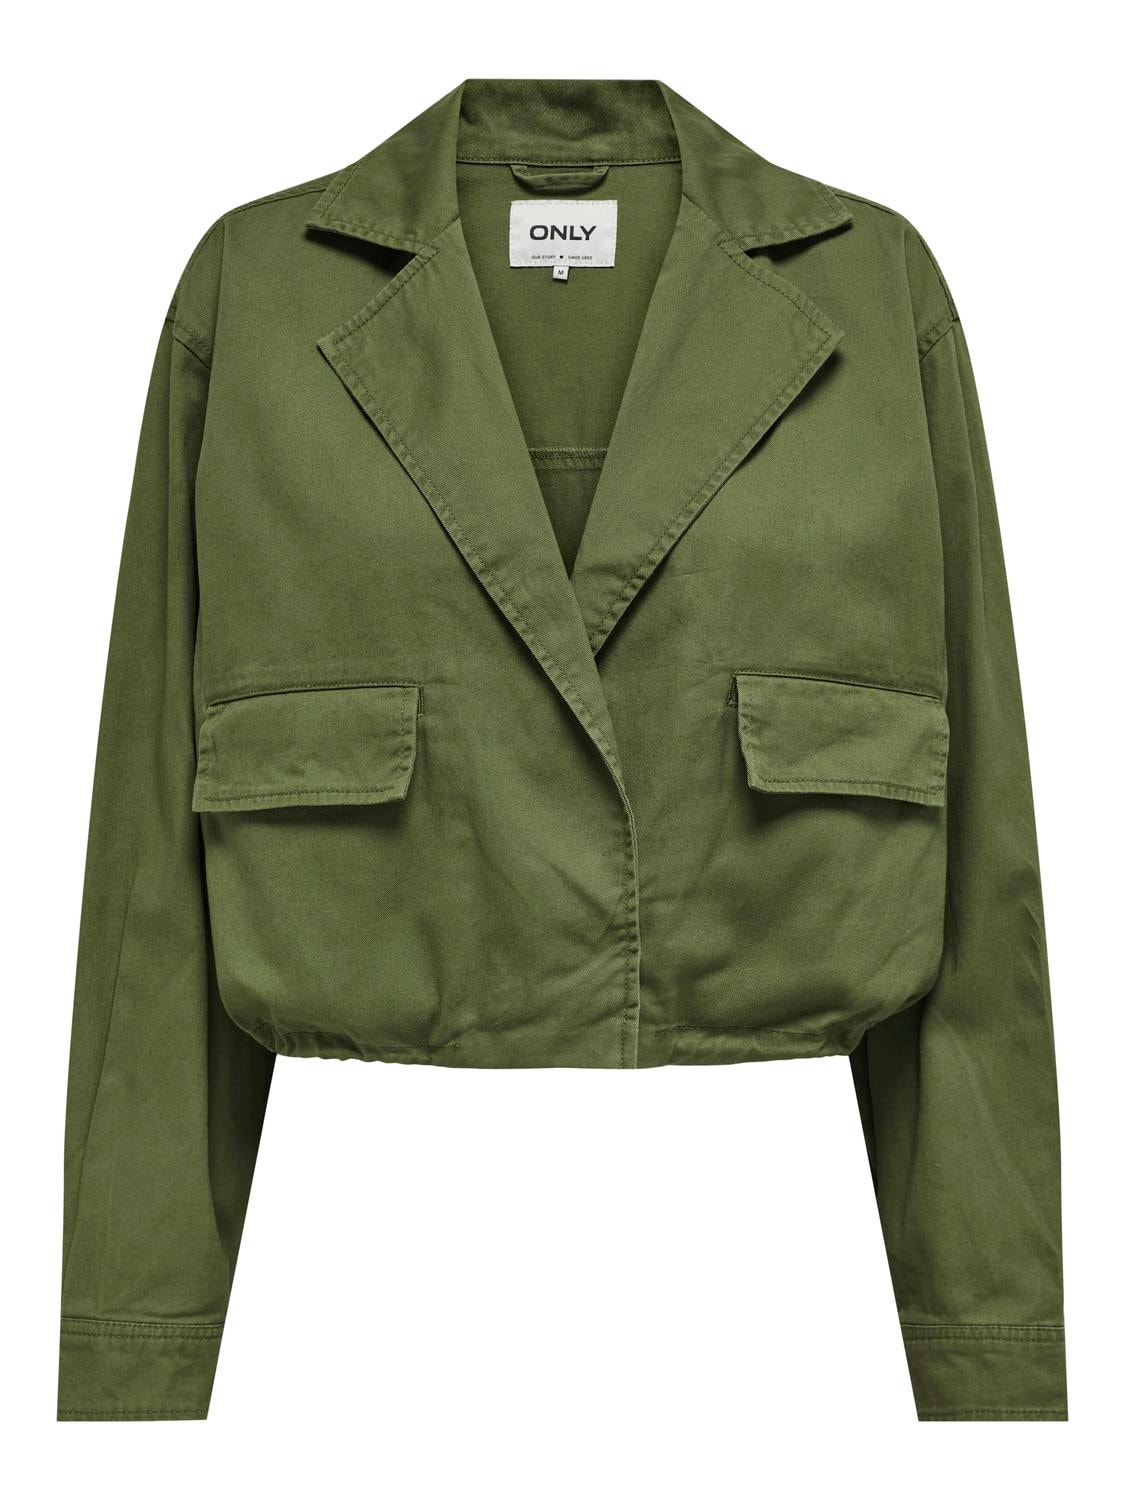 ONLY Spread collar Buttoned cuffs Jacket -Capulet Olive - 15308769